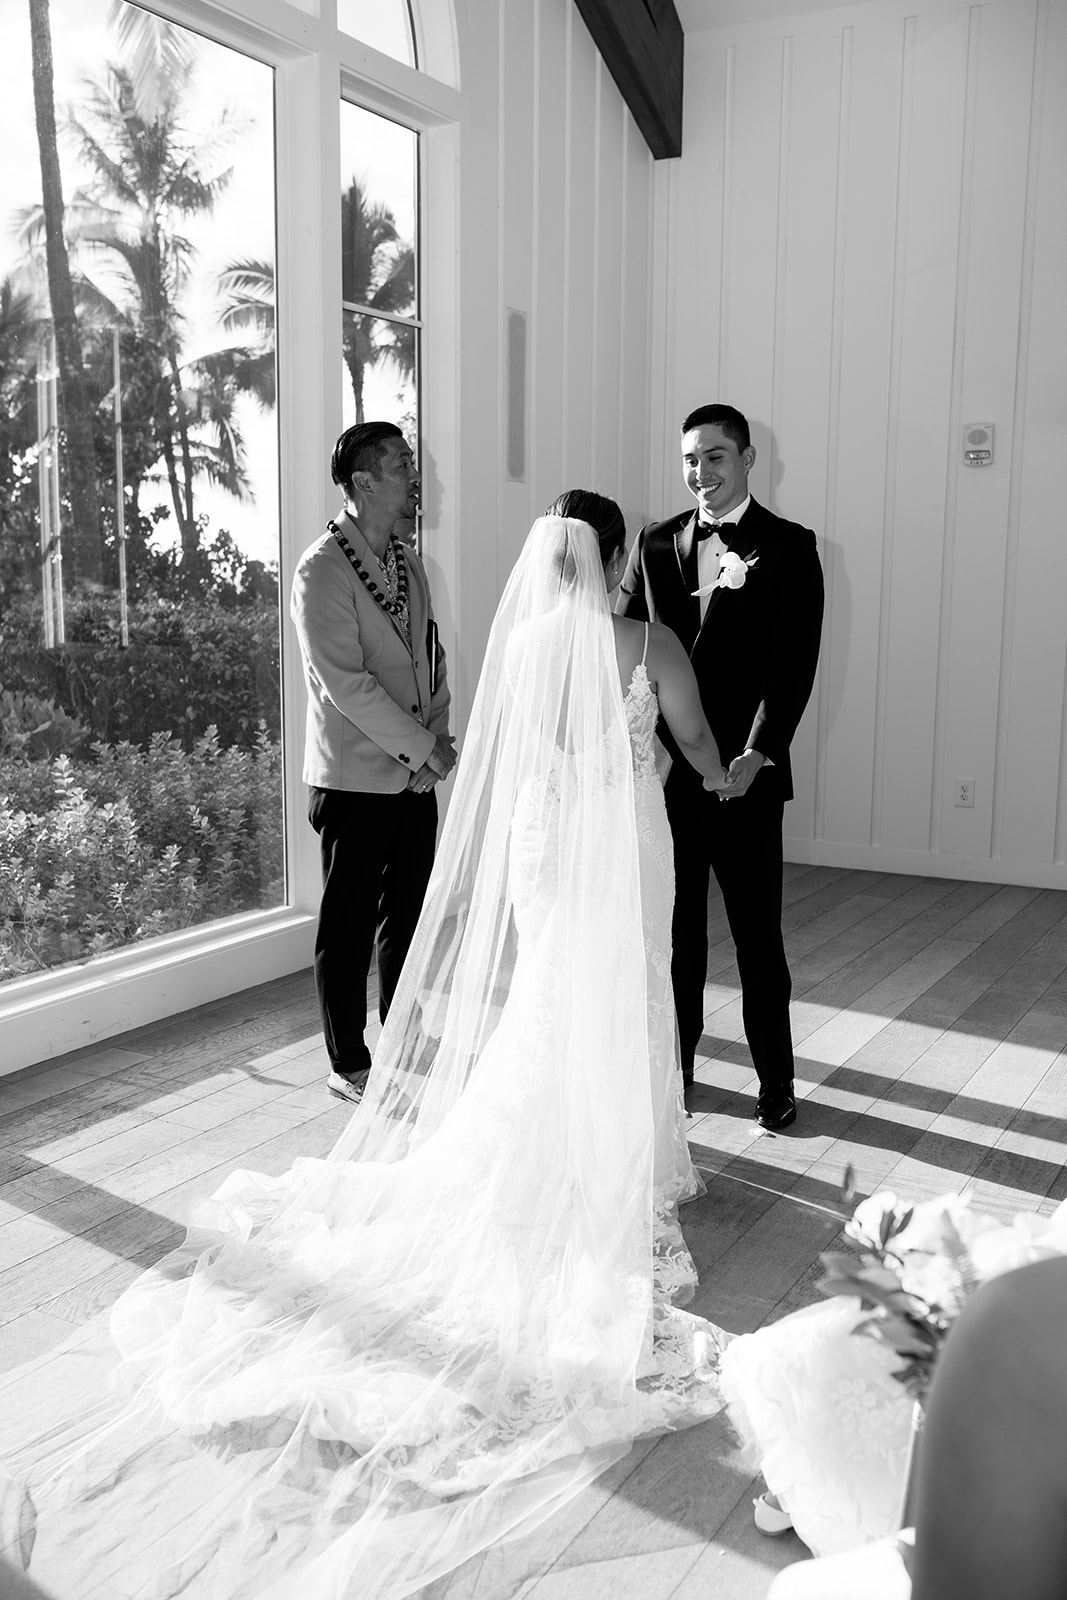 A black and white poto taken by Megan Moura of the bride and groom exchanging vows in the chapel at the Four Seasons